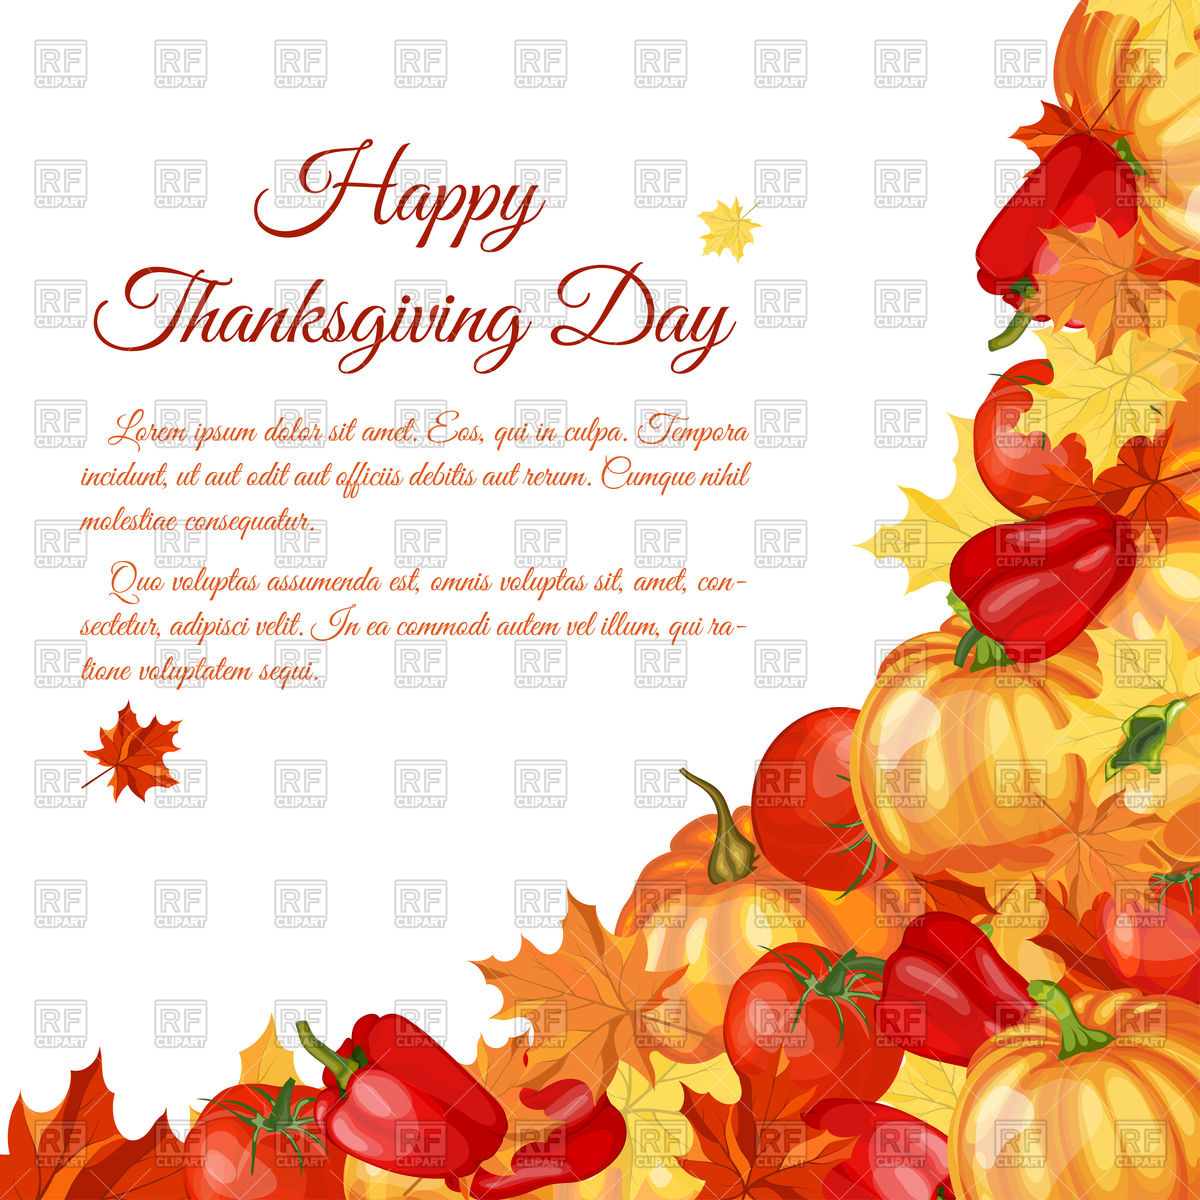 Thanksgiving Day Background Vector Image Of Background Textures